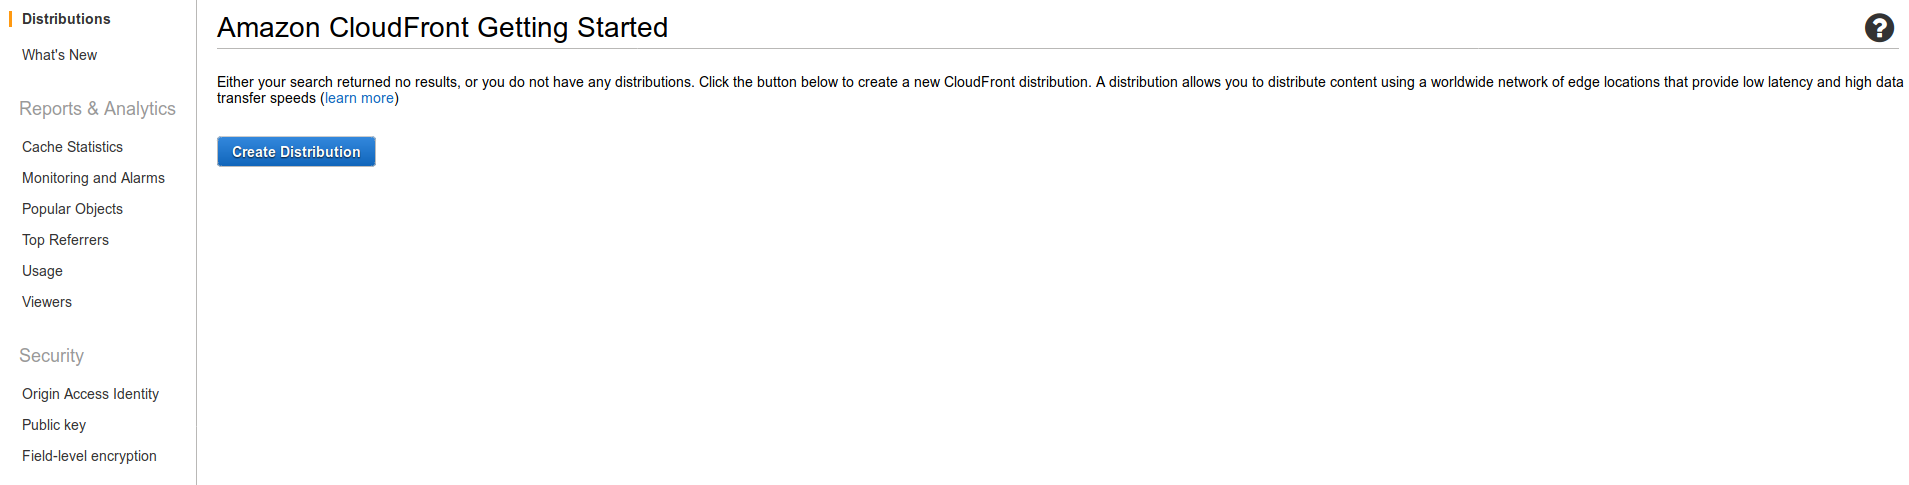 /media/aws/cloudfront-getting-started.png